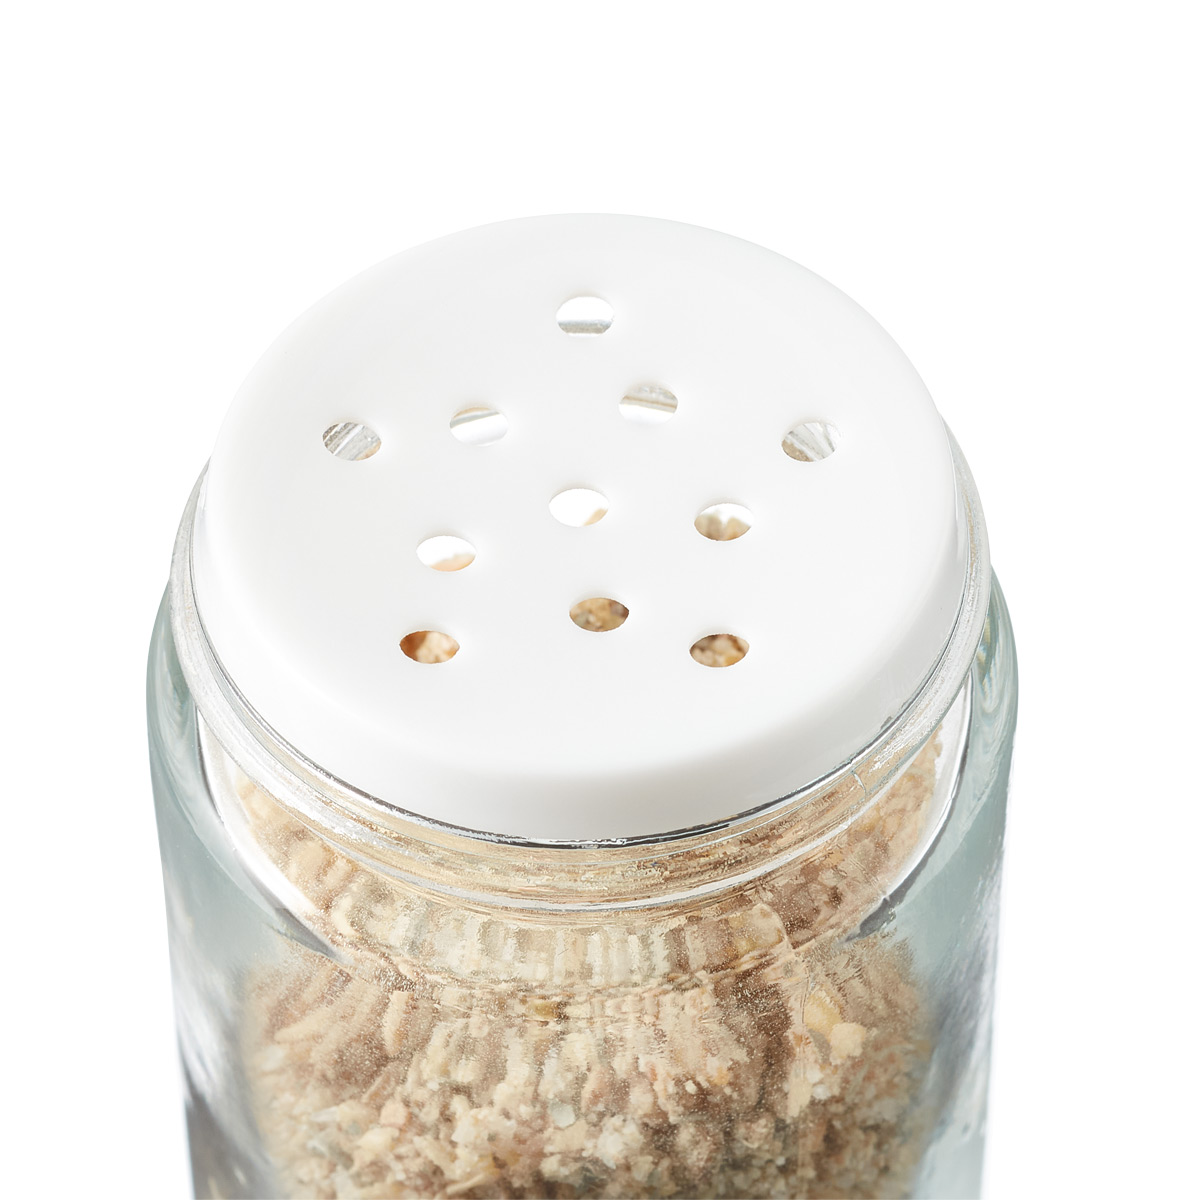 3 oz. Spice Bottle w/ White Lid Round, 1-5/8 x 1-5/8 x 3-3/4 H | The Container Store